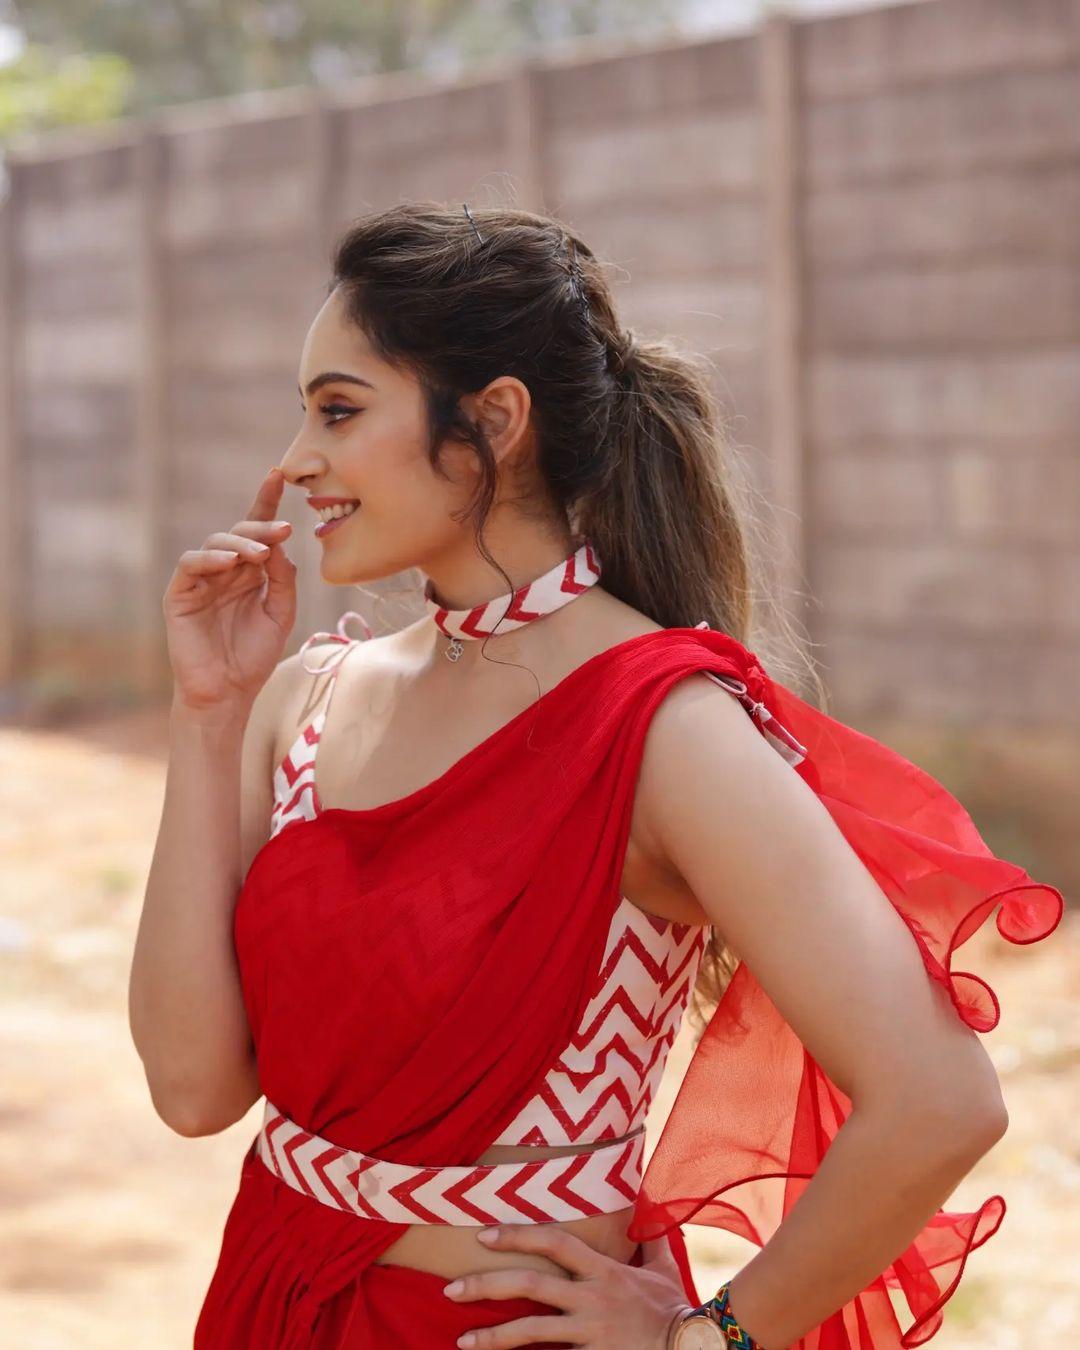 Shrutika Arjun in red saree hot and sexy photoshoot | hot and sexy photos  Photos: HD Images, Pictures, Stills, First Look Posters of Shrutika Arjun  in red saree hot and sexy photoshoot |